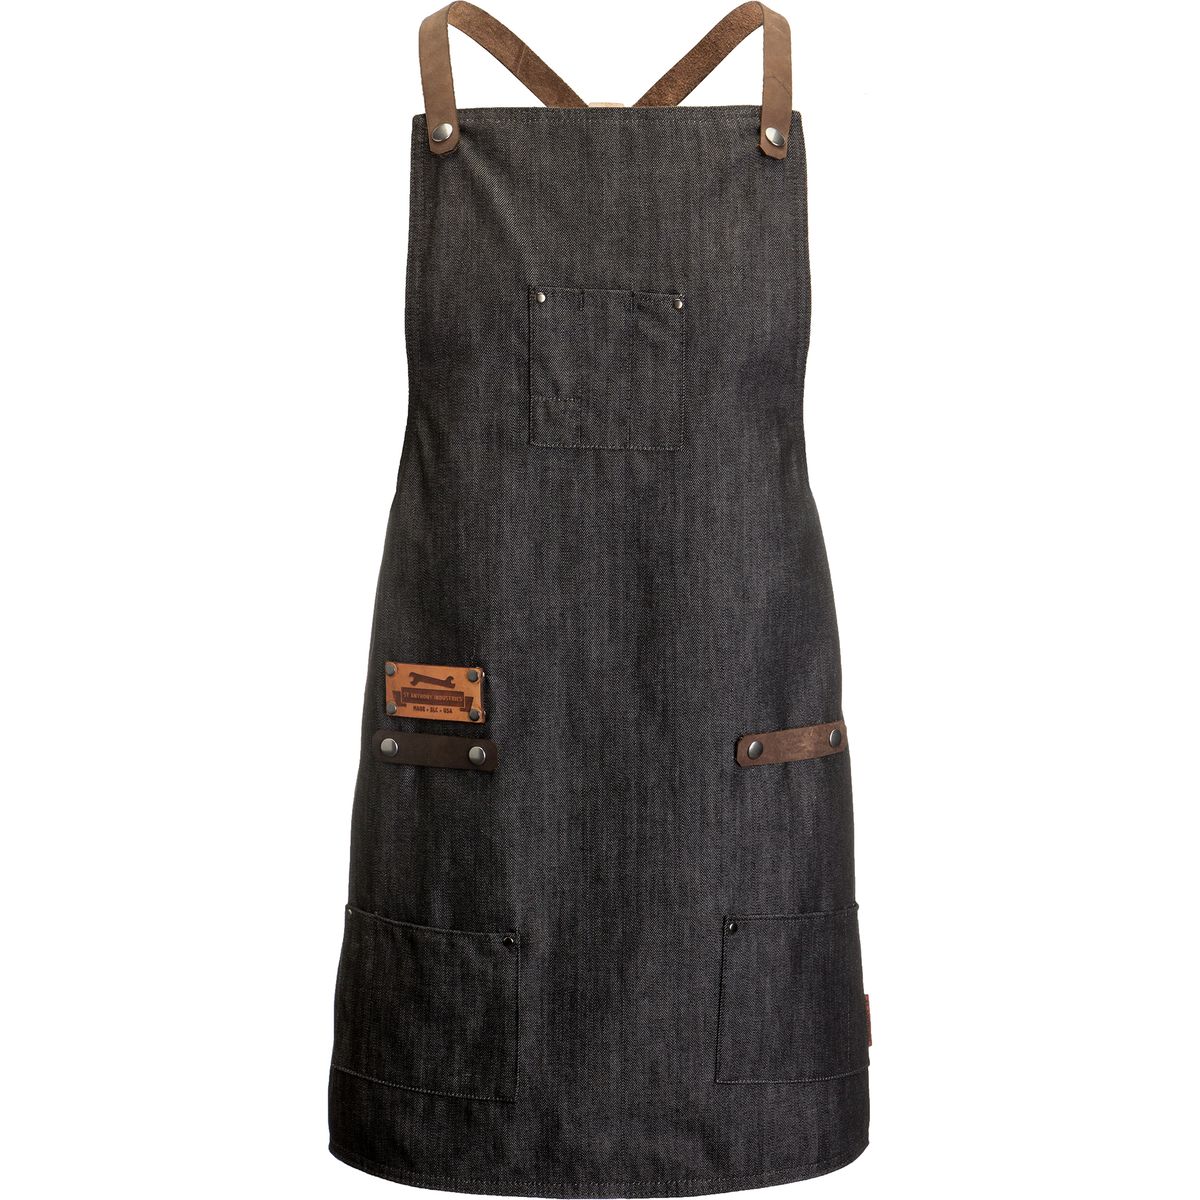 St Anthony Industries Custom Denim and Leather Shop Apron